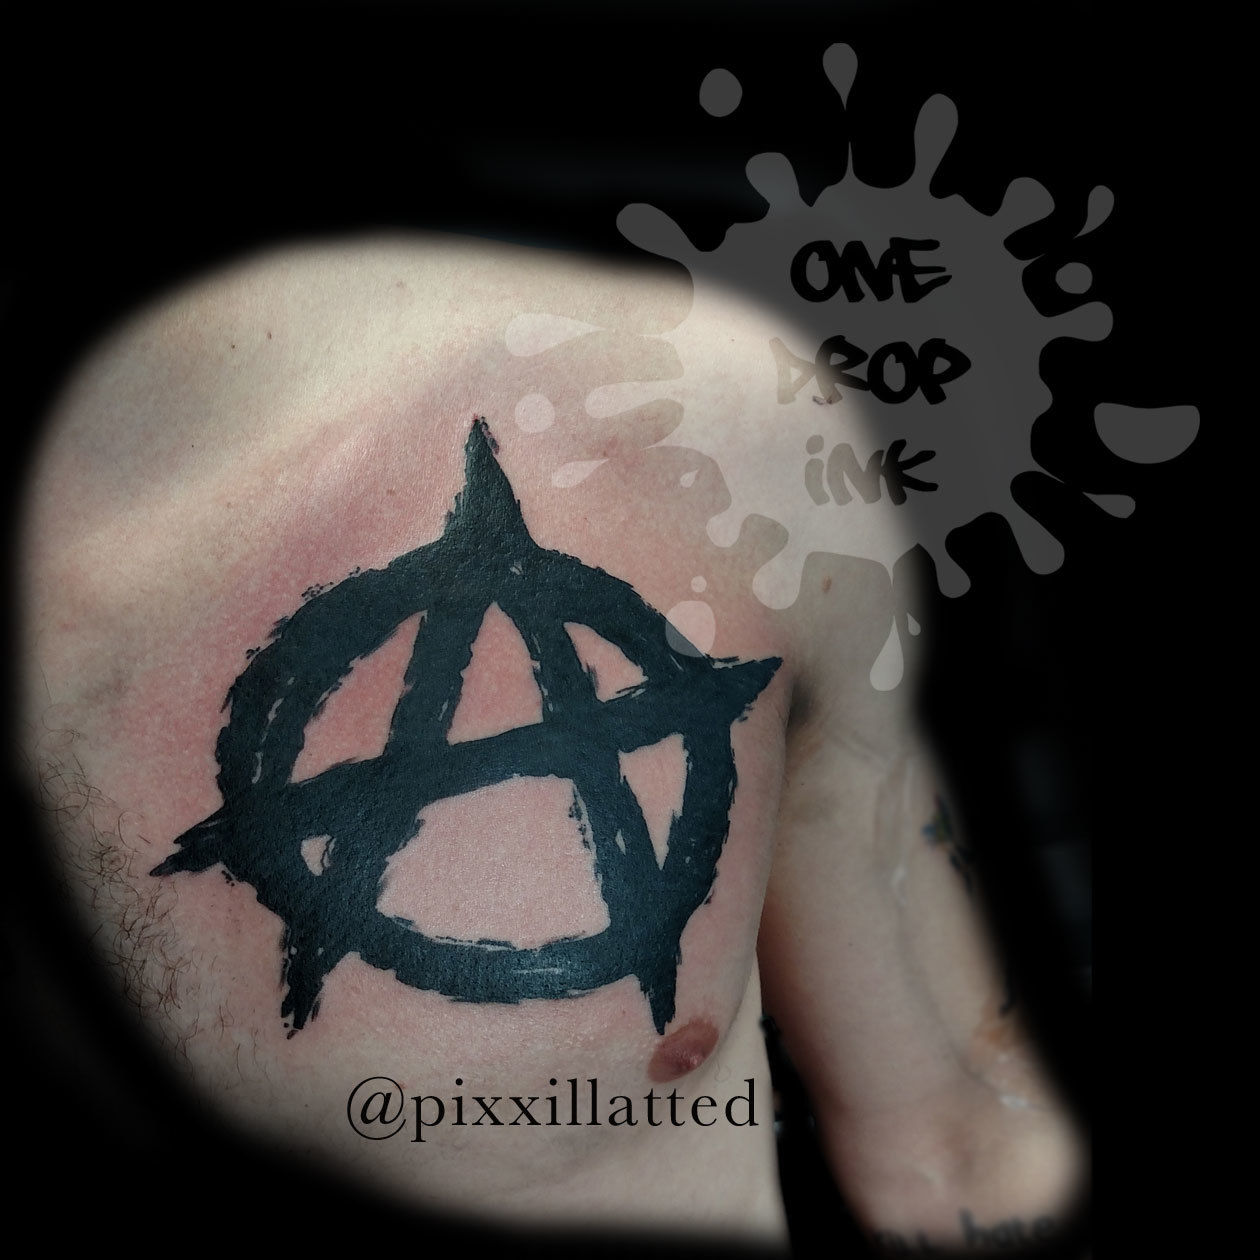 Celebrity Anarchy Symbol Tattoos | Steal Her Style